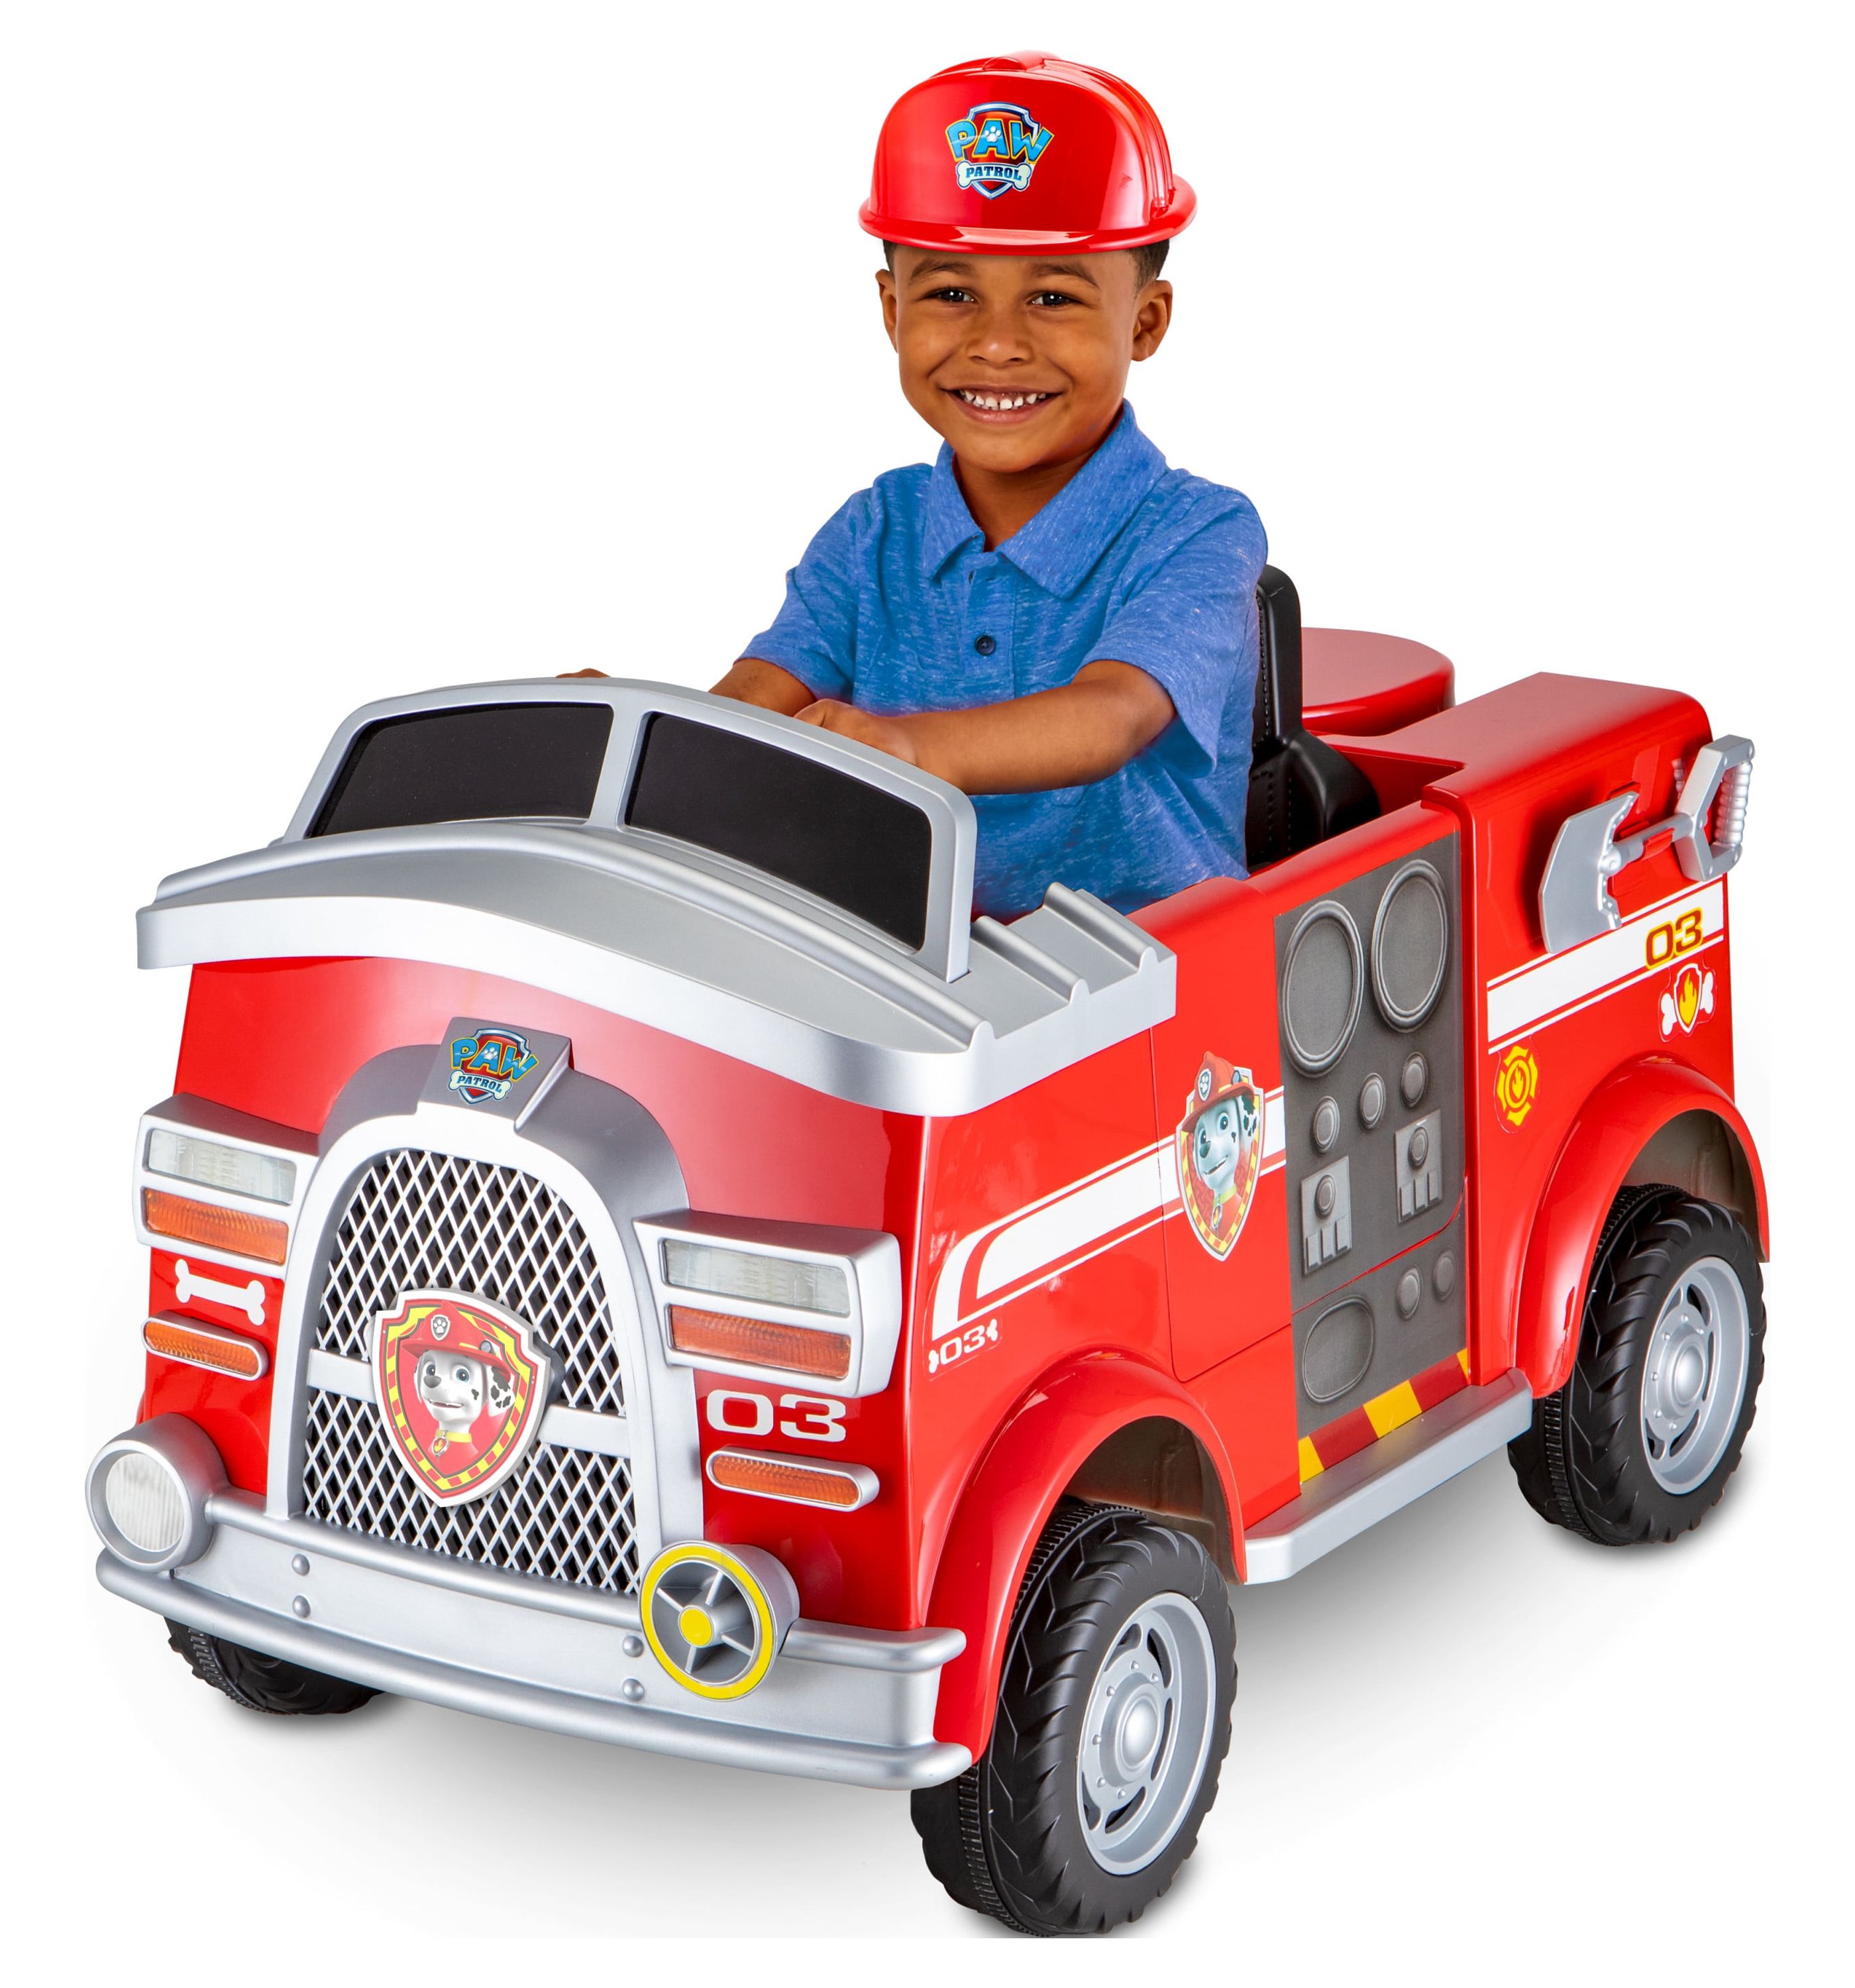 Nickelodeon's PAW Patrol: Marshall Rescue Fire Truck, Ride-On Toy by Kid Trax - image 3 of 10